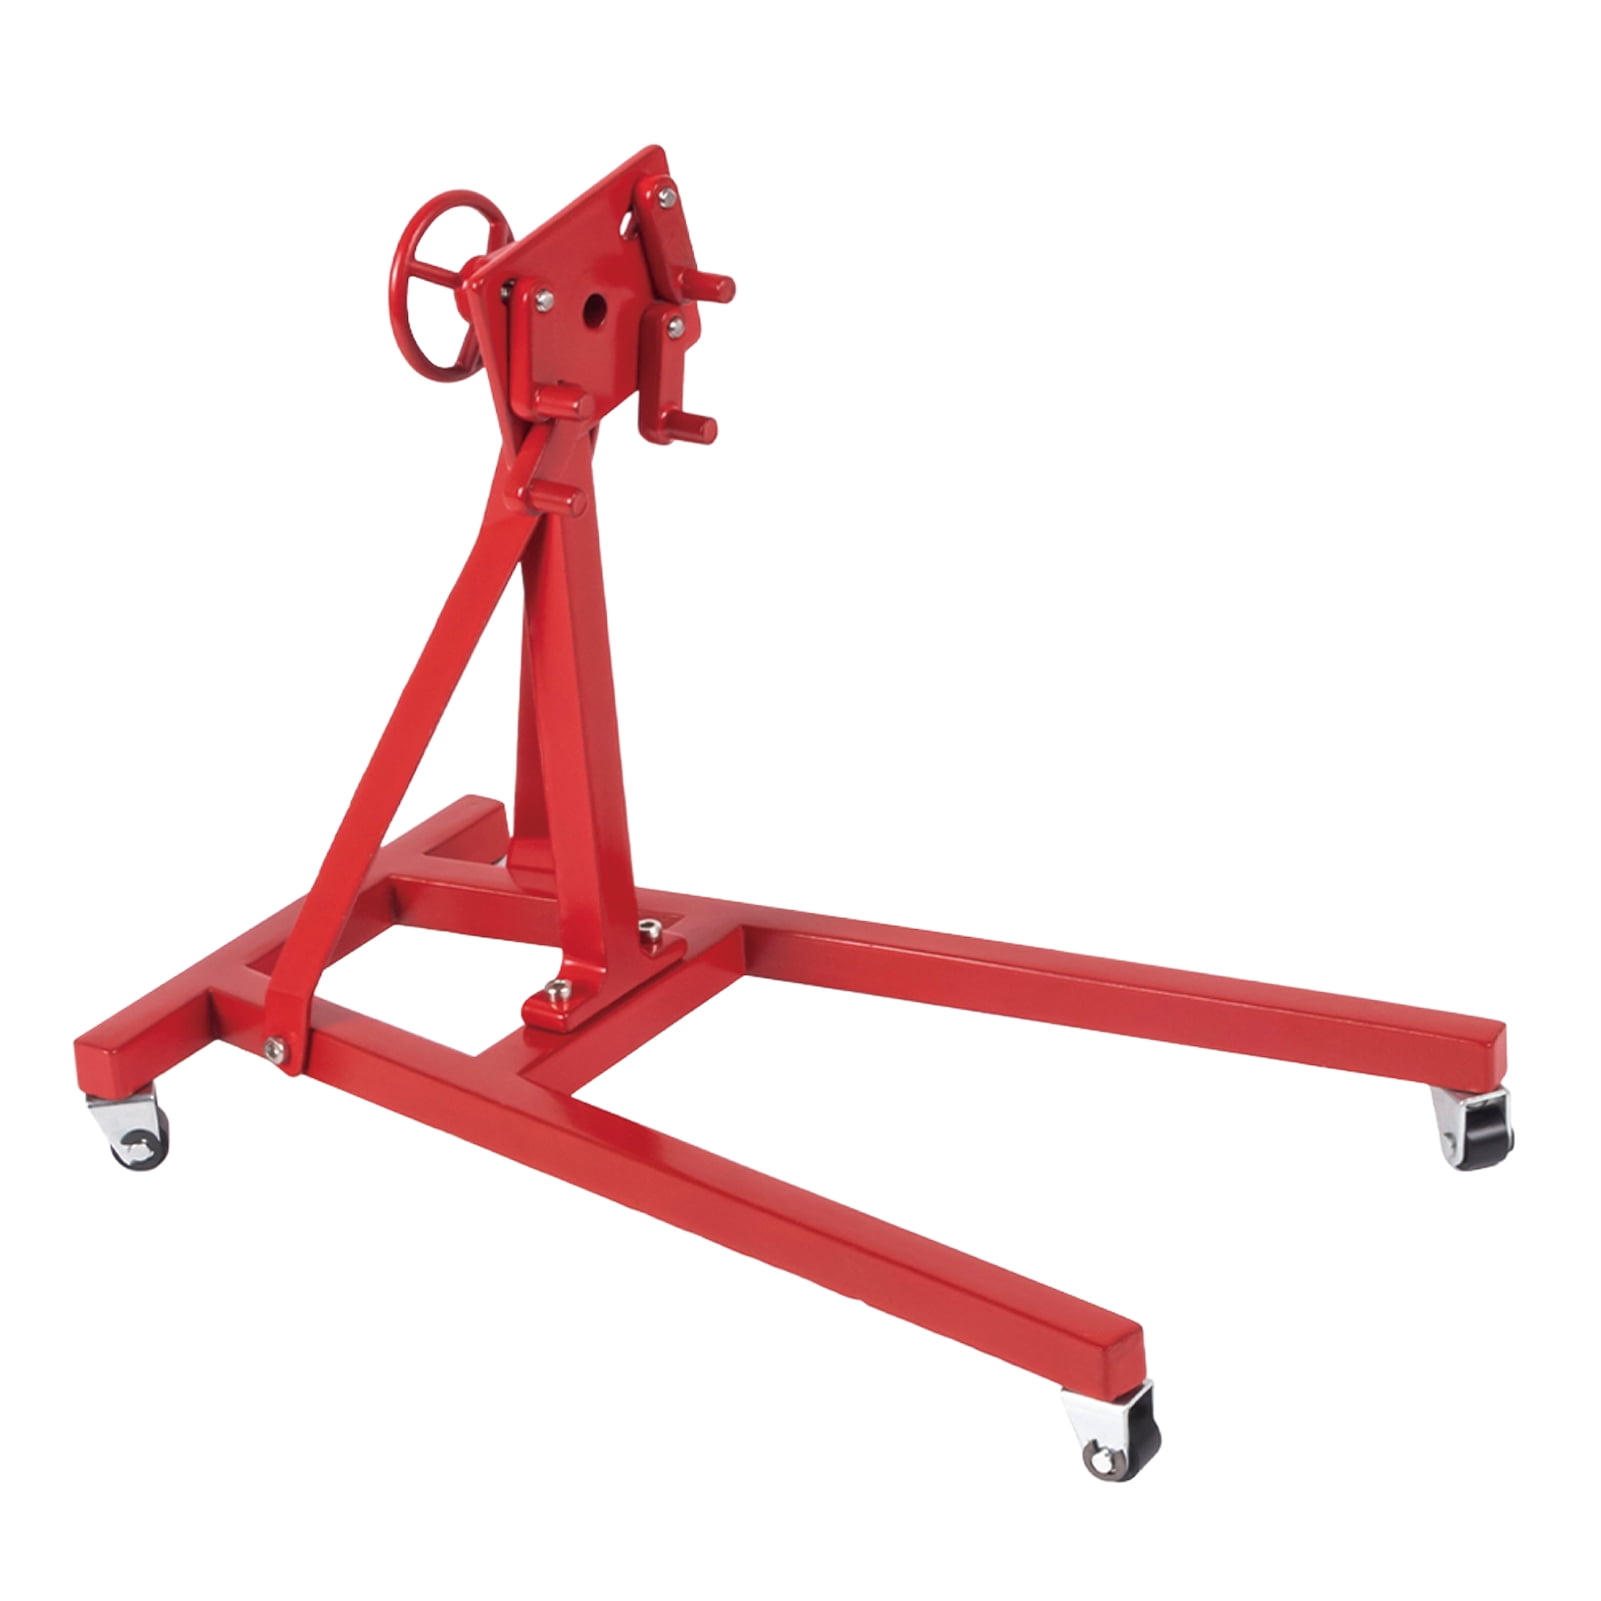 Professional Hydraulic Folding Engine Crane Stand Hoist Lift Jack With Wheels Universal Engine stand ORETG45 Repair Bracket Stainless Steel Rotating Engine Stand for V8 Motor 